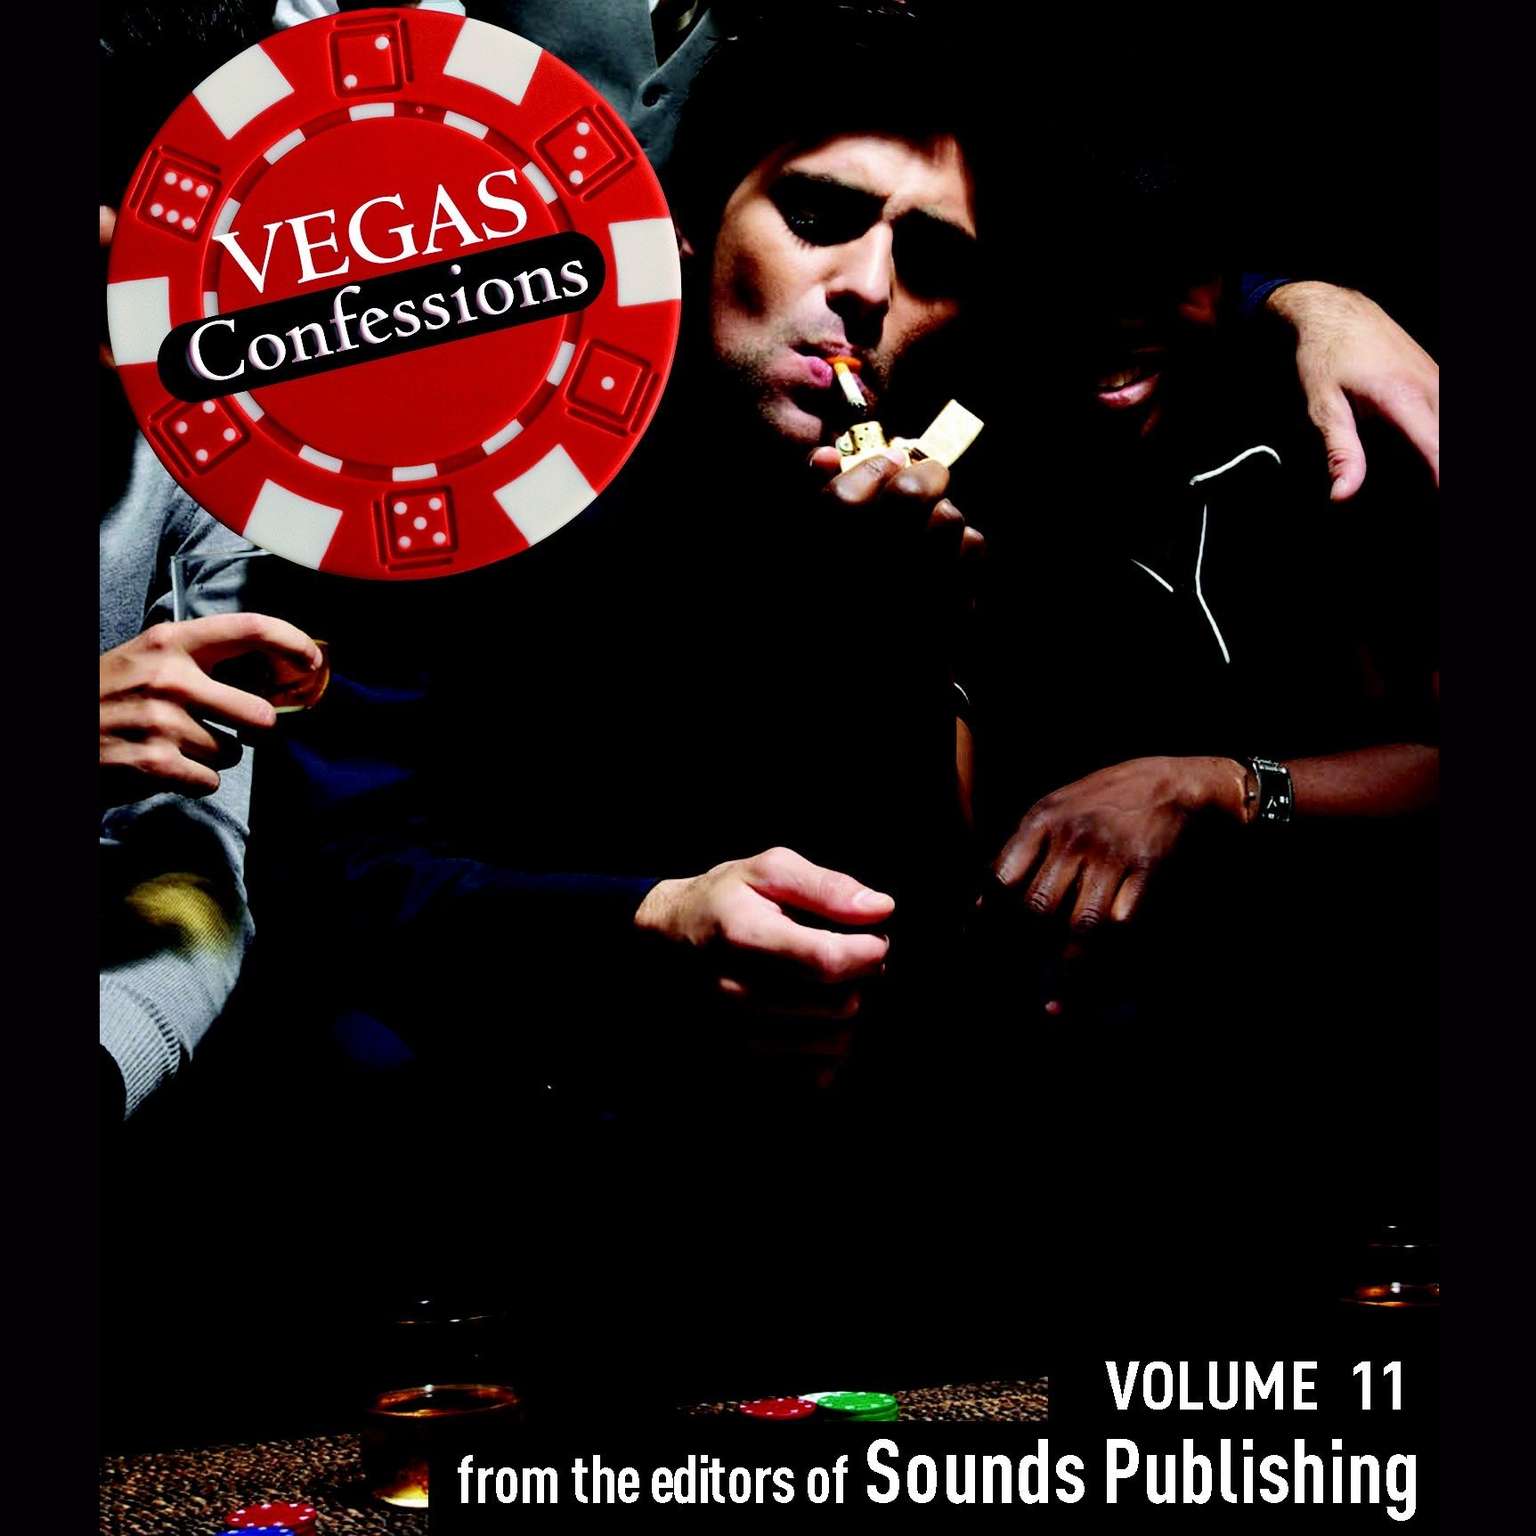 Vegas Confessions 11 Audiobook, by The Editors of Sounds Publishing